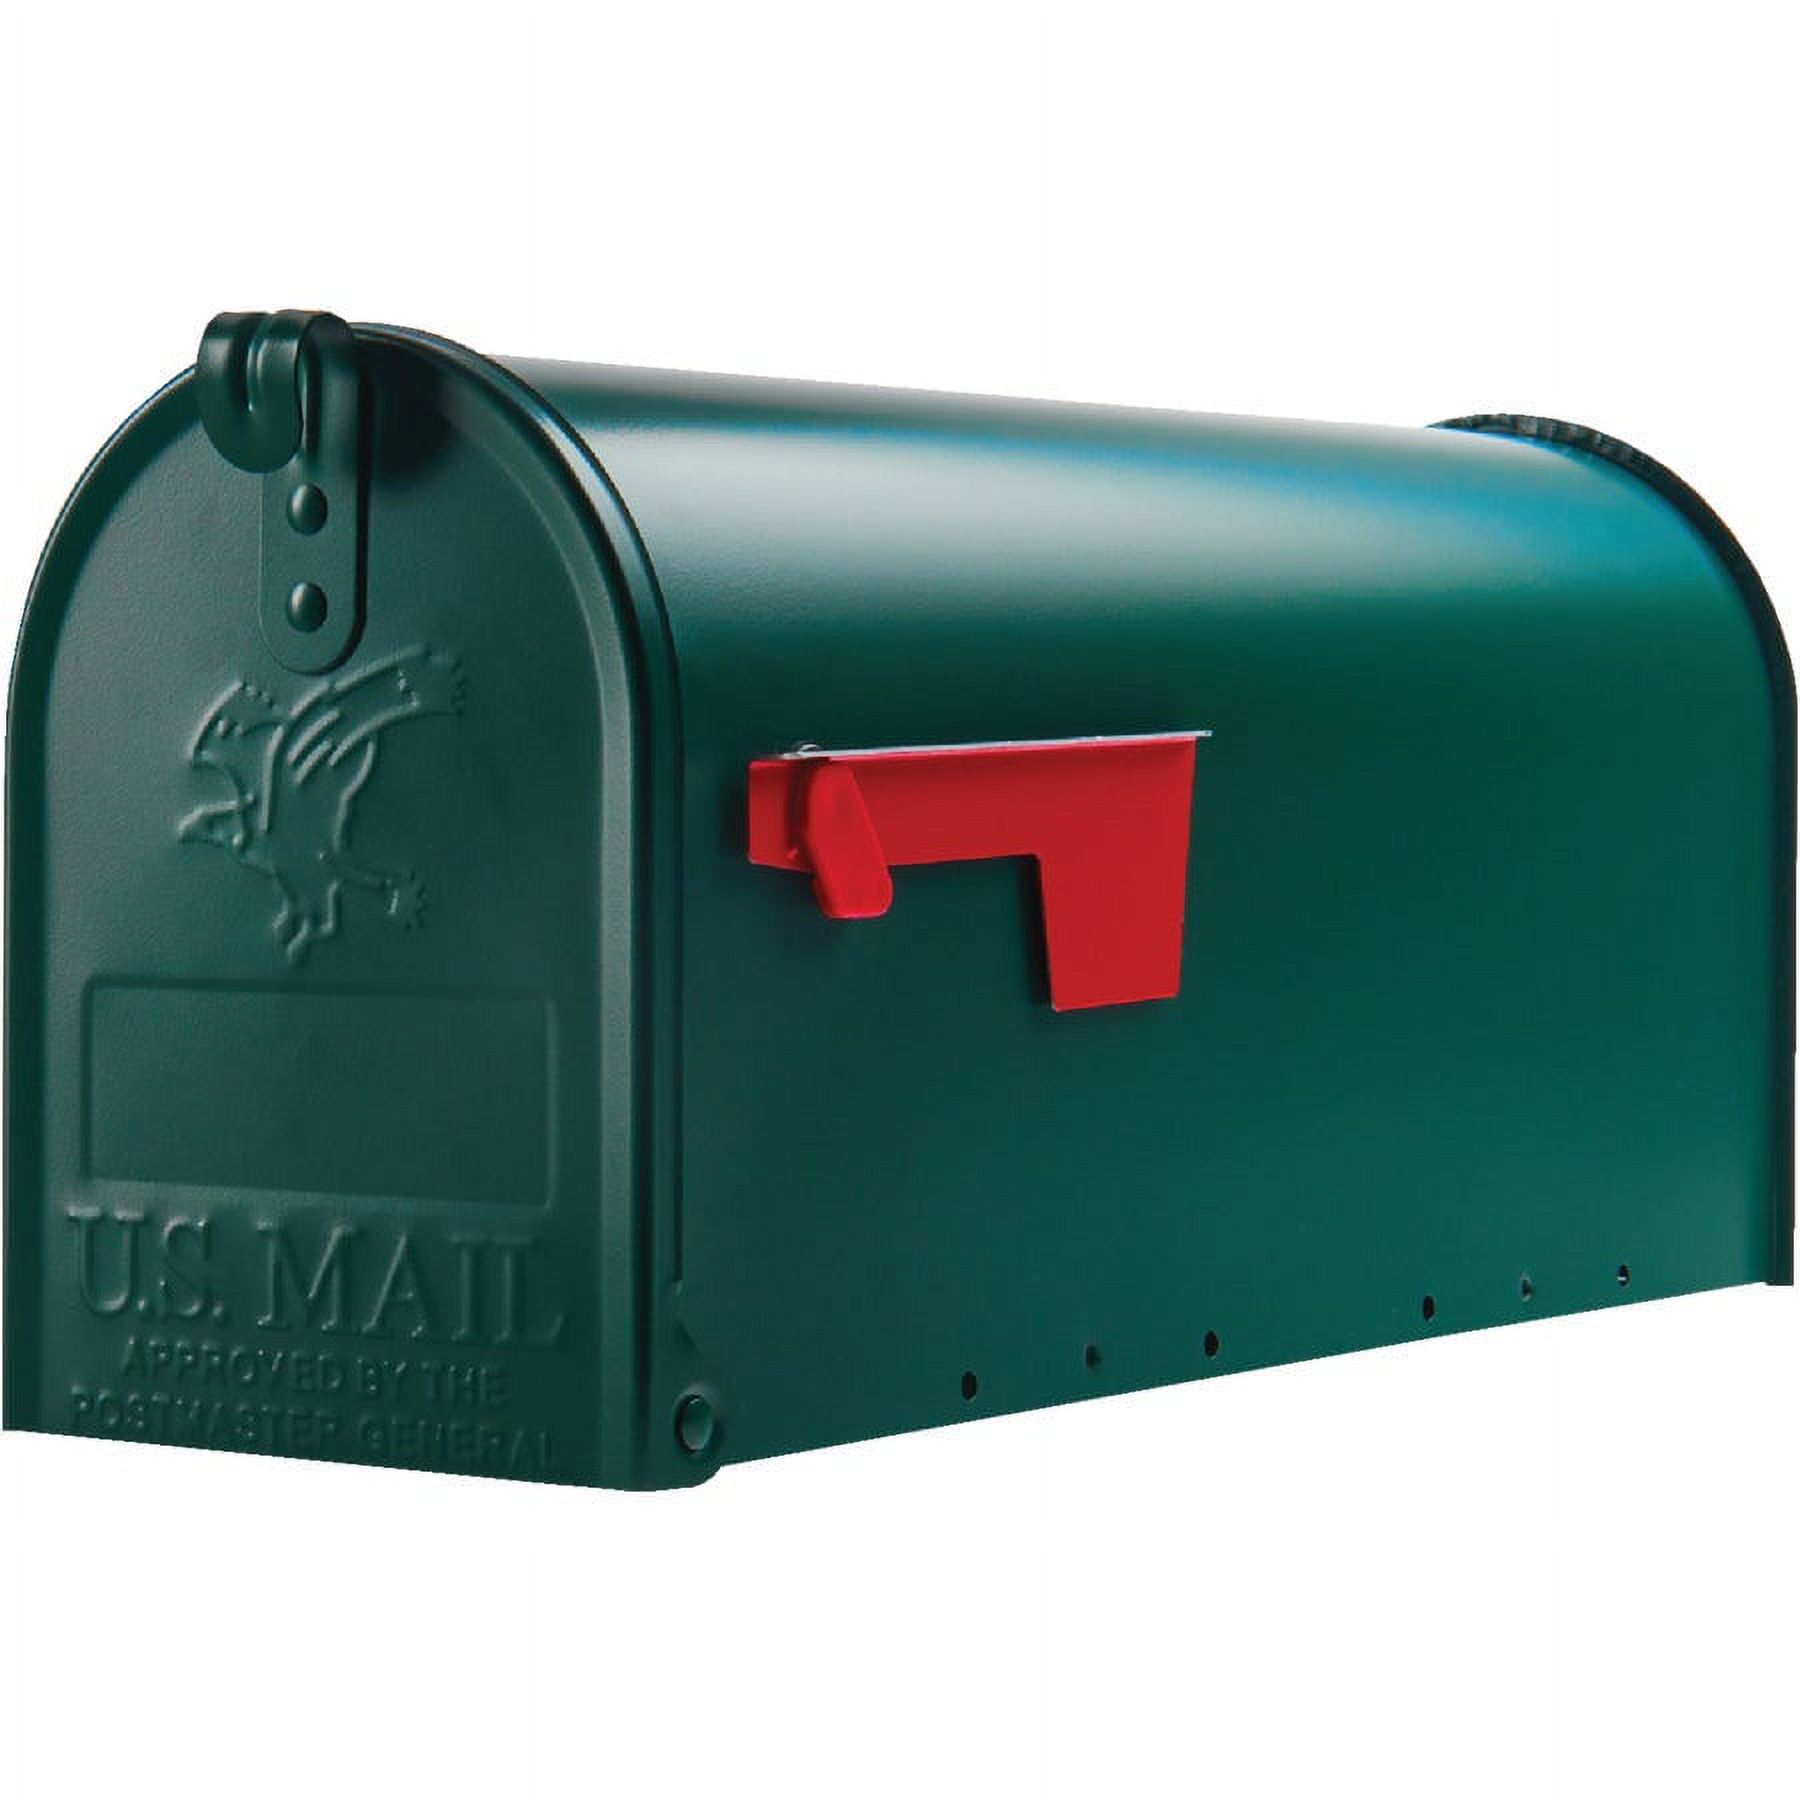 Gibraltar Mailboxes Elite E1100G00 Mailbox, 800 cu-in Capacity, Galvanized Steel, Powder-Coated - image 3 of 3